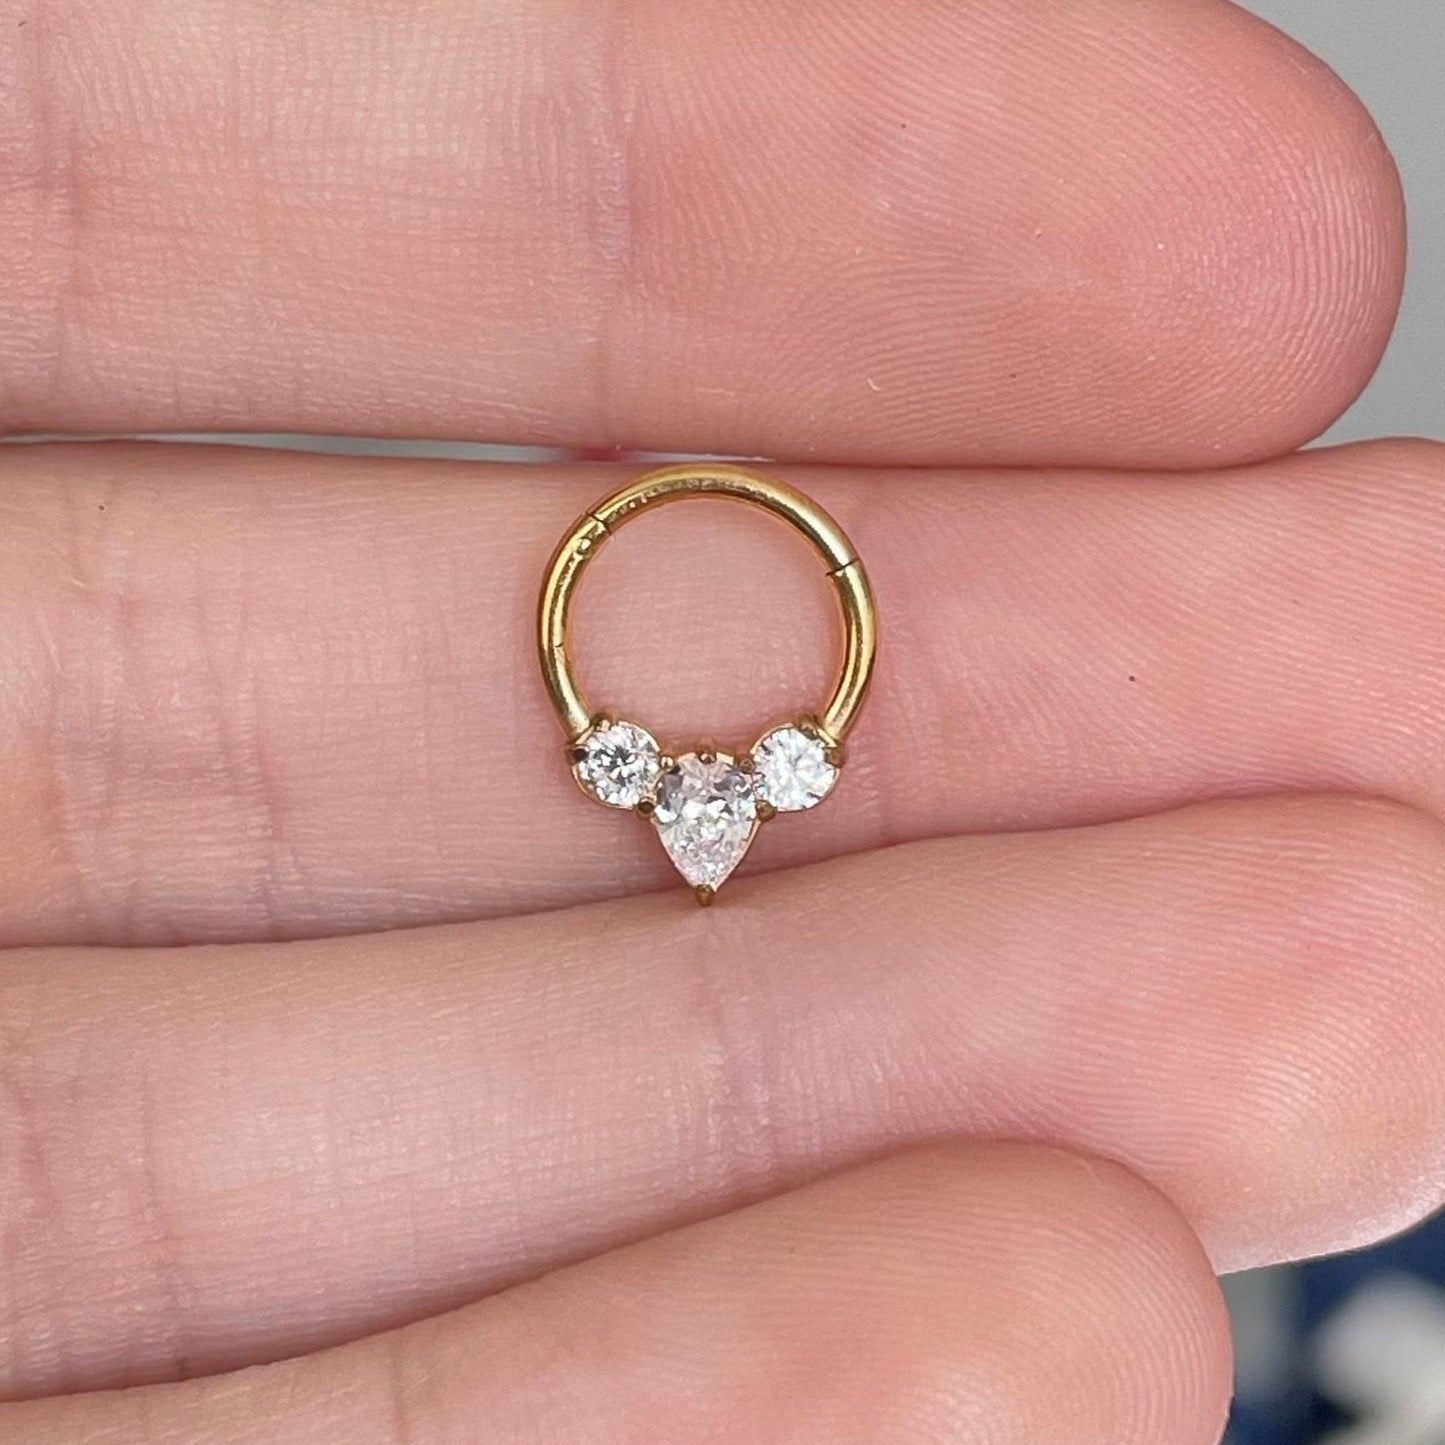 Gold CZ Septum Piercing (16G | 8mm or 10mm | Surgical Steel | Gold, Silver or Rose Gold)